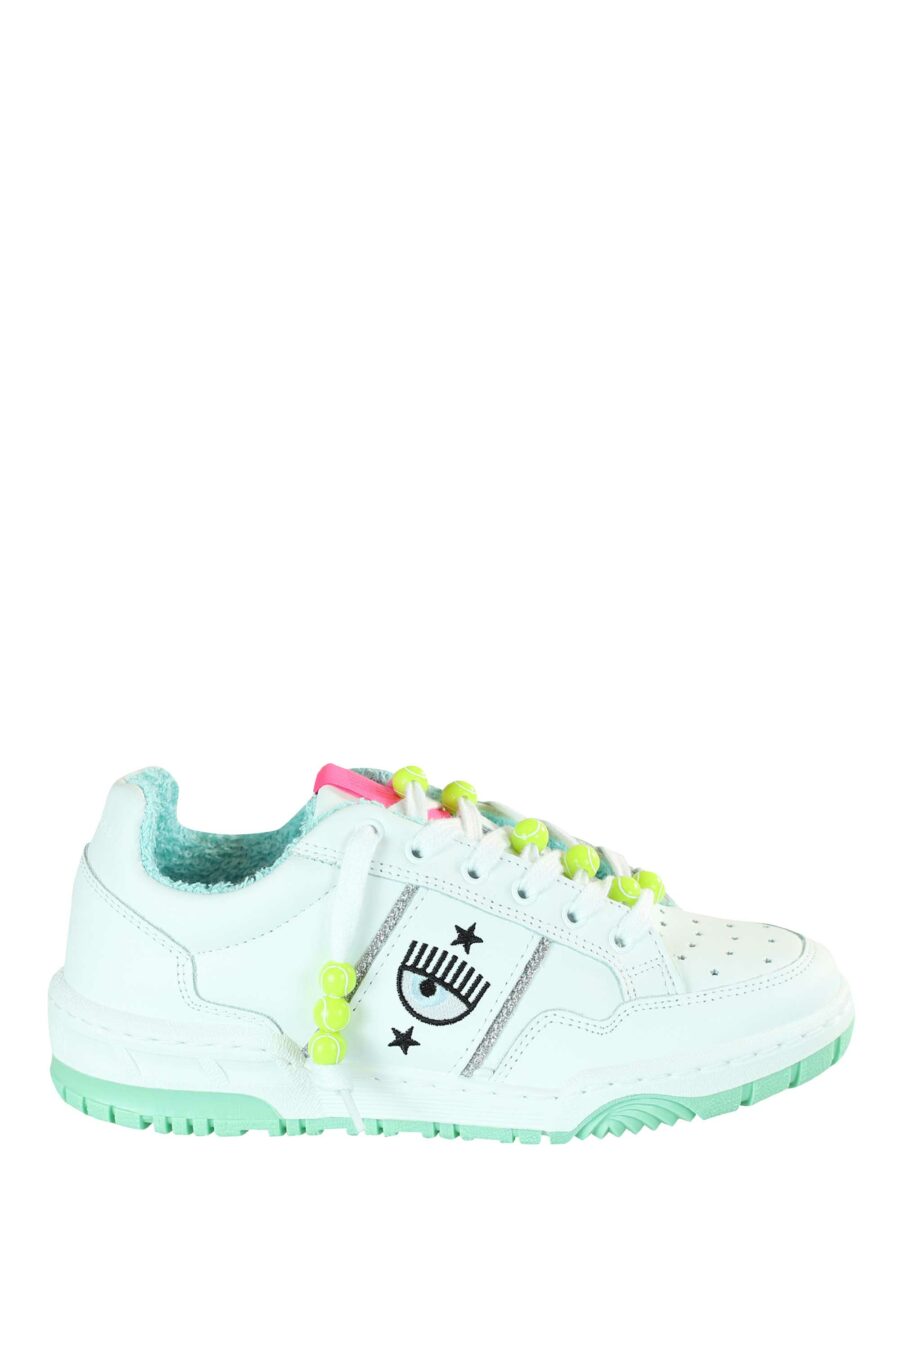 White trainers with eye logo and multicoloured details - 8059388228850